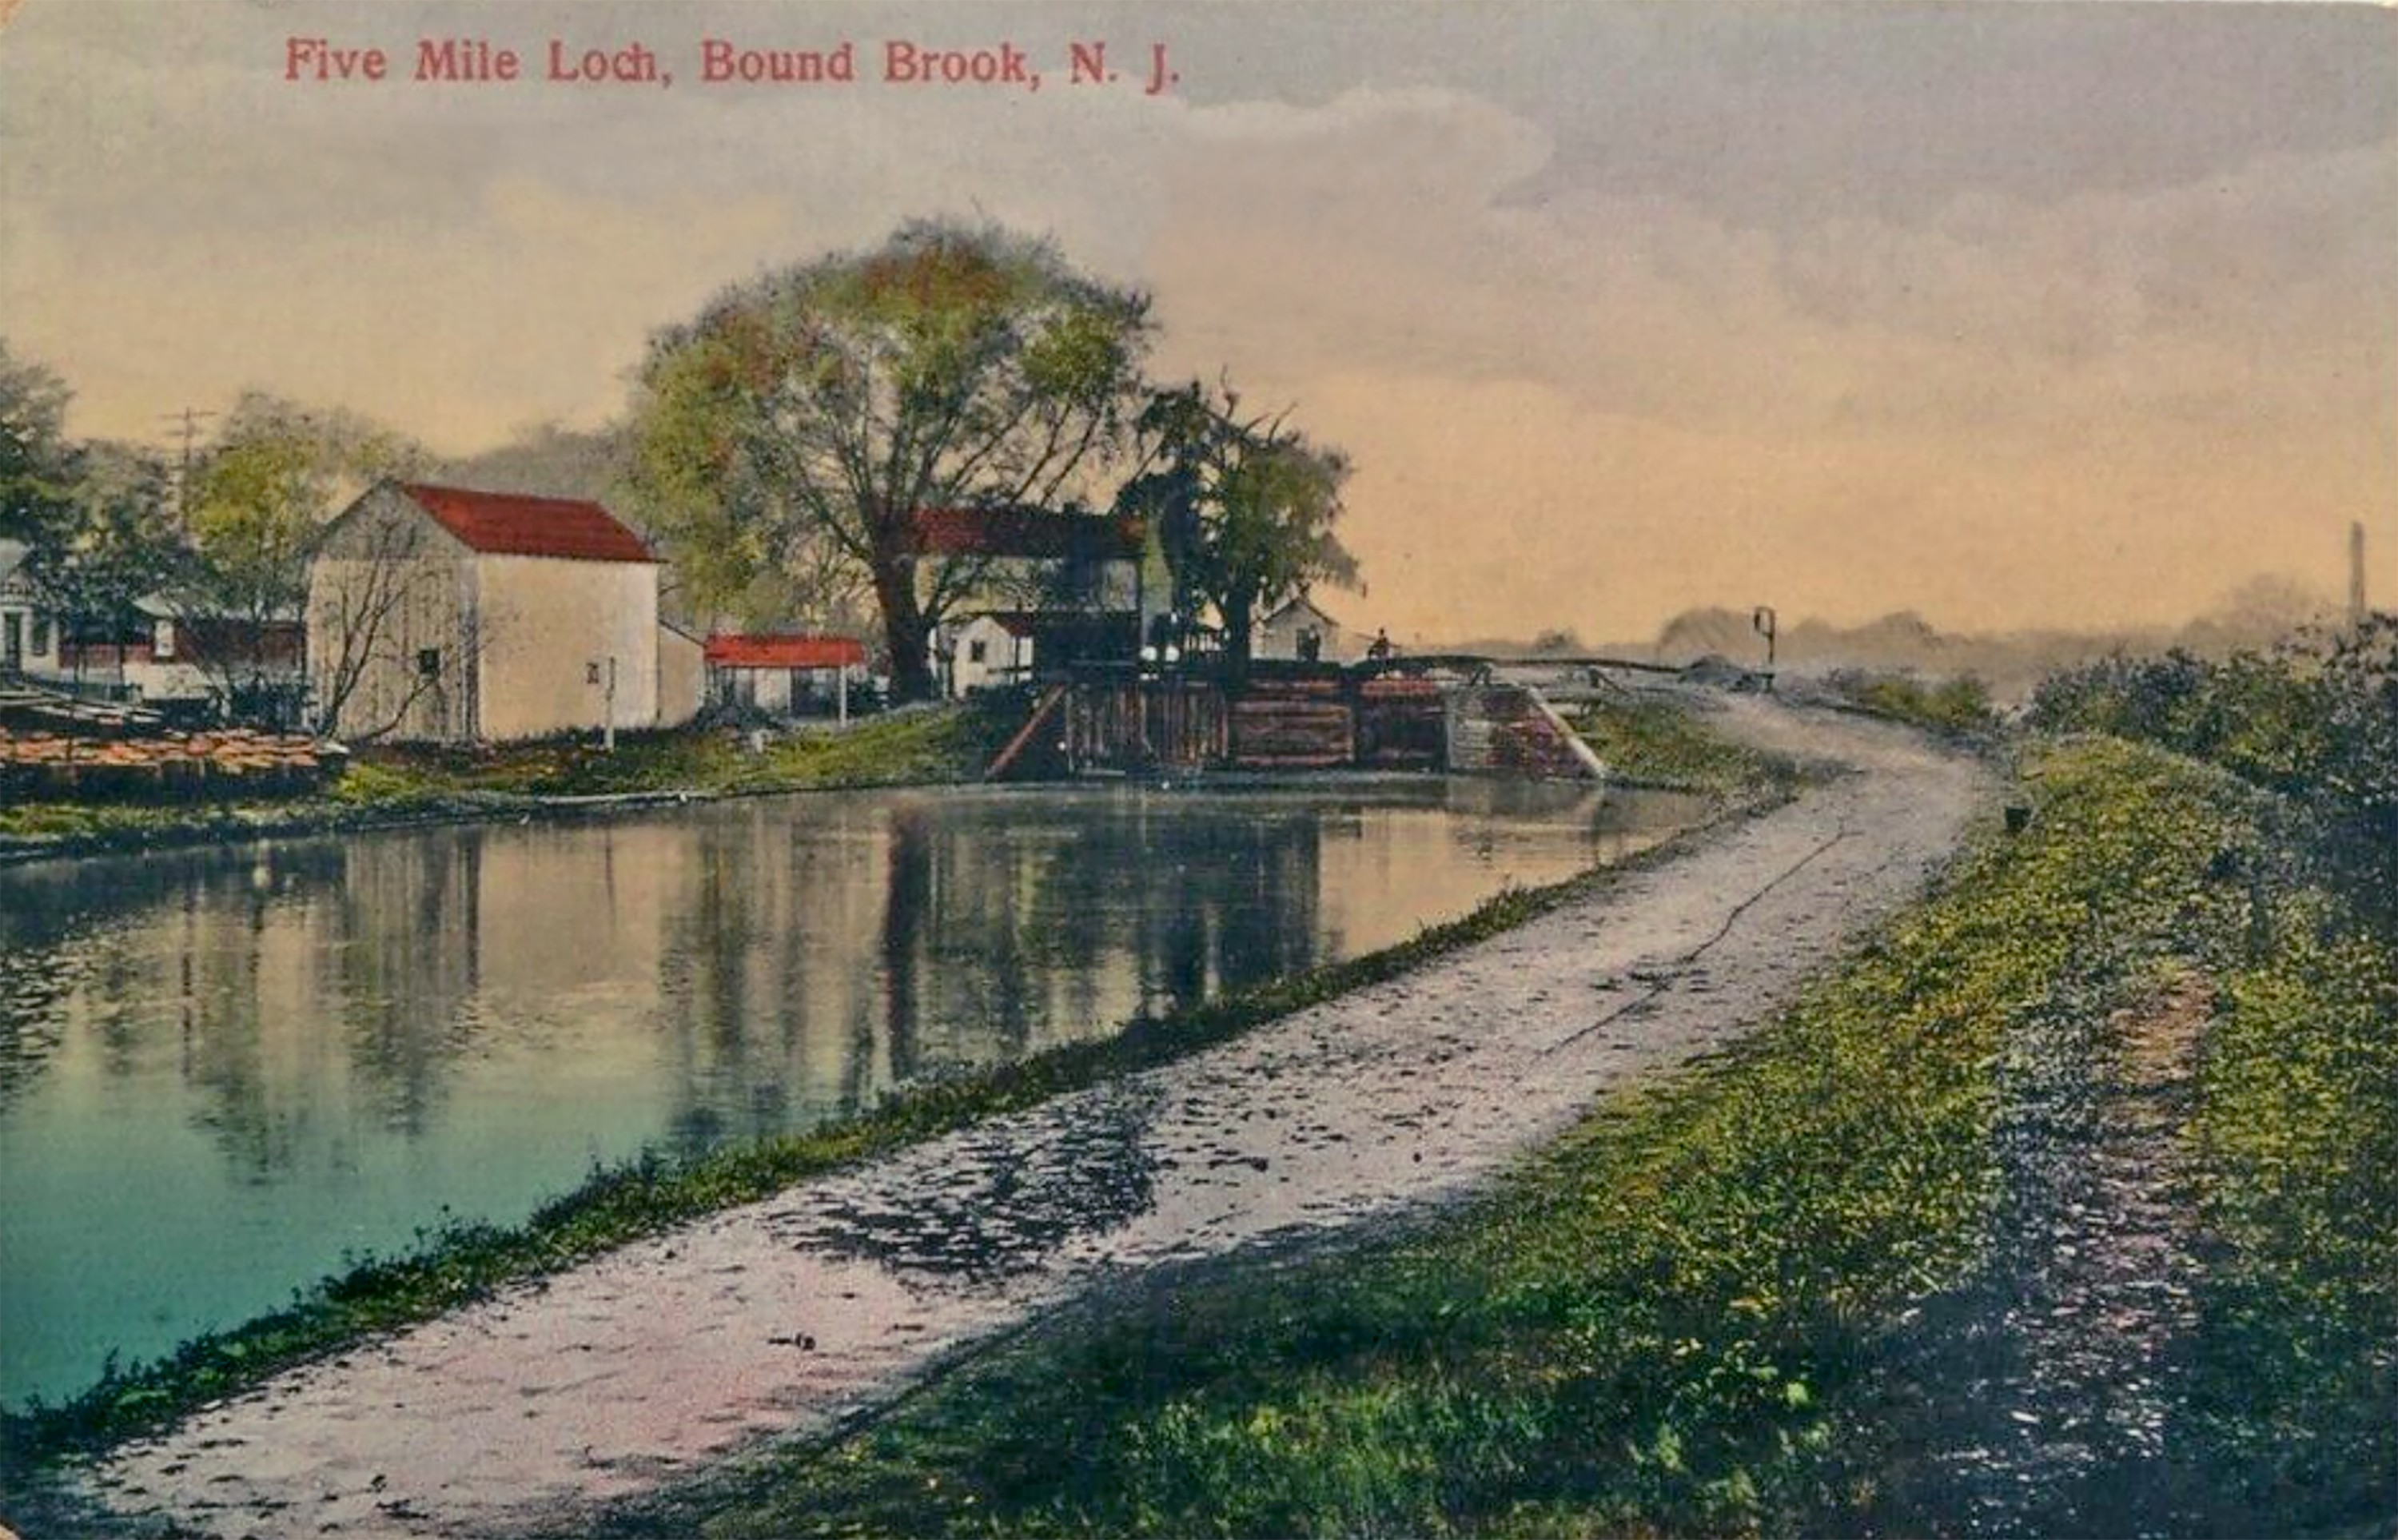 During the period of the canal’s operation, Lock No. 12 was the last lock before the so-called “Deep Lock” and Double Outlet locks at New Brunswick.  Nicknamed “5-Mile Lock,” it is actually closer to six miles from the eastern terminus of the canal.  It was near this location that the Fieldville Dam was constructed on the Raritan River to provide supplemental water to flow into the last five miles of the canal.  